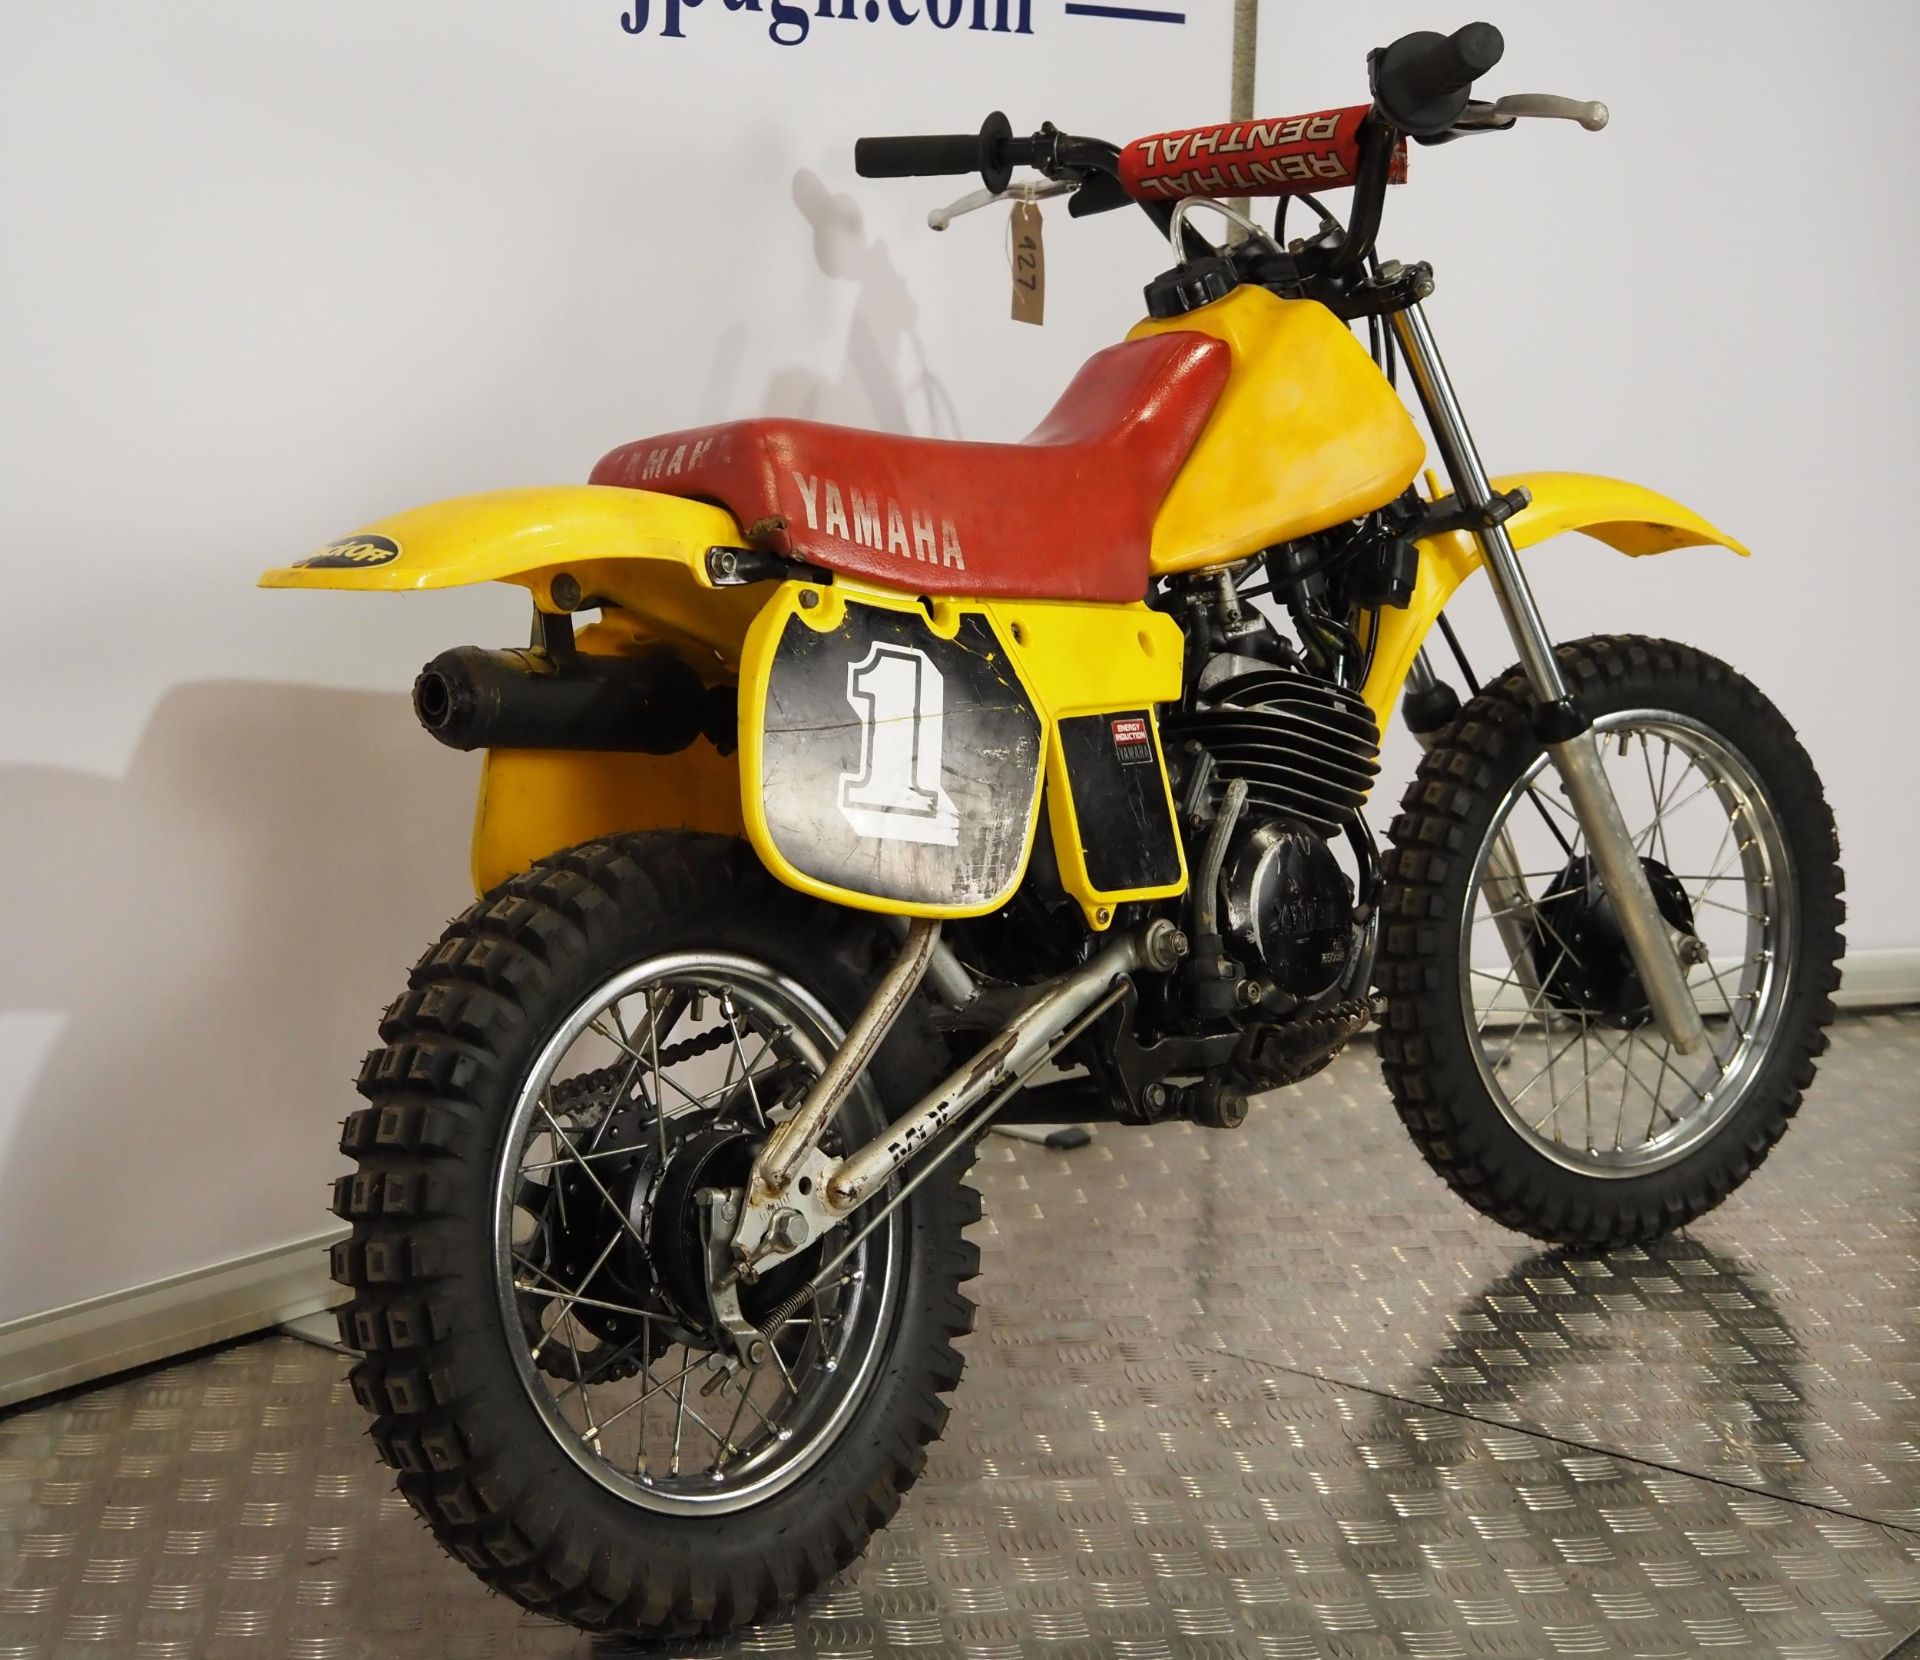 Yamaha YZ60 childs scrambler. 1982. Engine No. 5X1-000786 Engine turns over but has not been - Image 3 of 5